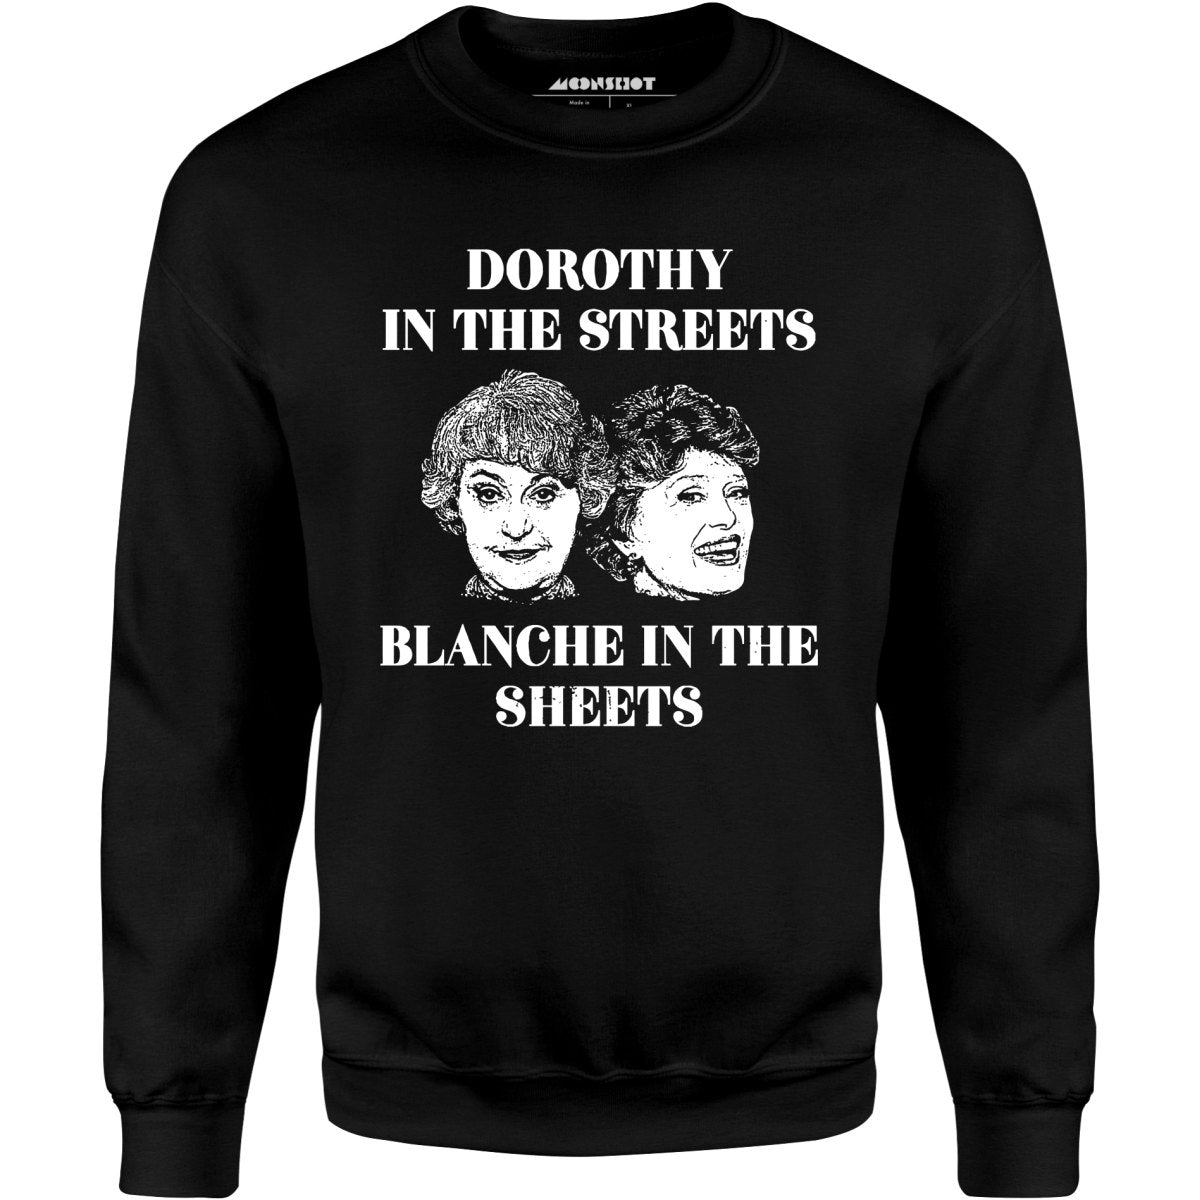 Dorothy in the Streets Blanche in the Sheets - Unisex Sweatshirt